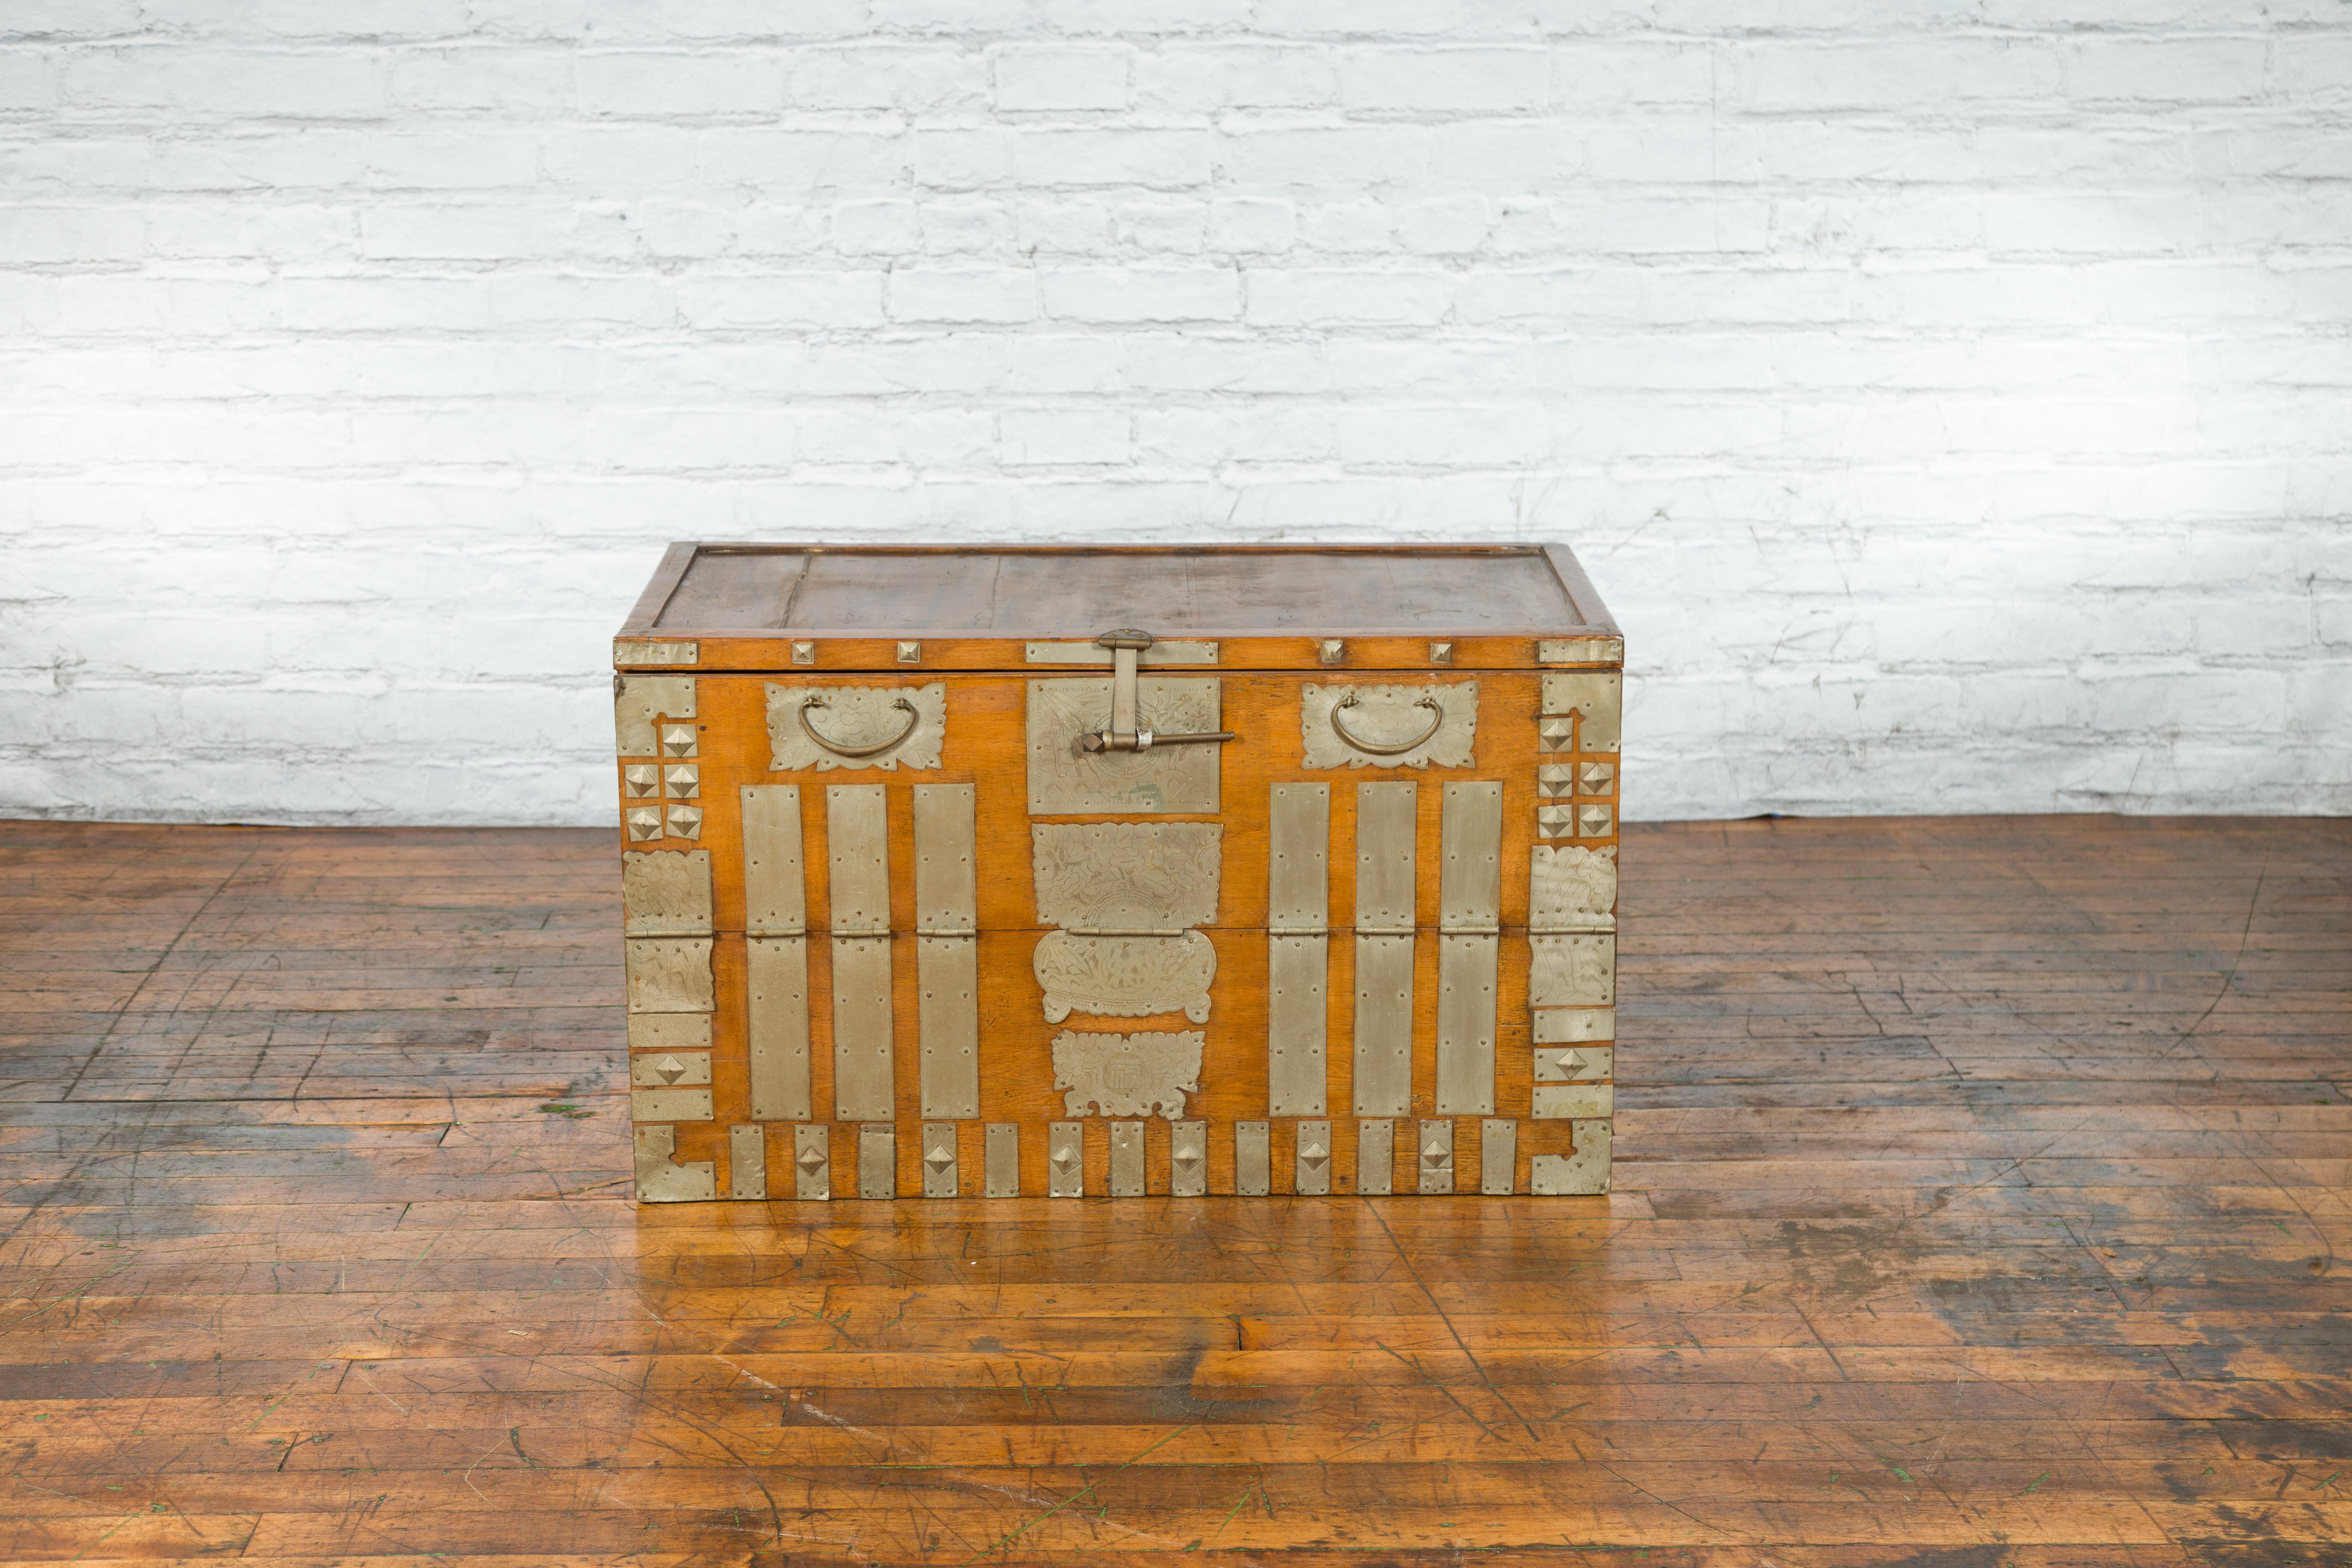 An antique Korean storage chest from the early 20th century, with silver plated brass hardware and drop down panel. Created in Korea during the early years of the 20th century, this storage chest features a light brown structure beautifully accented